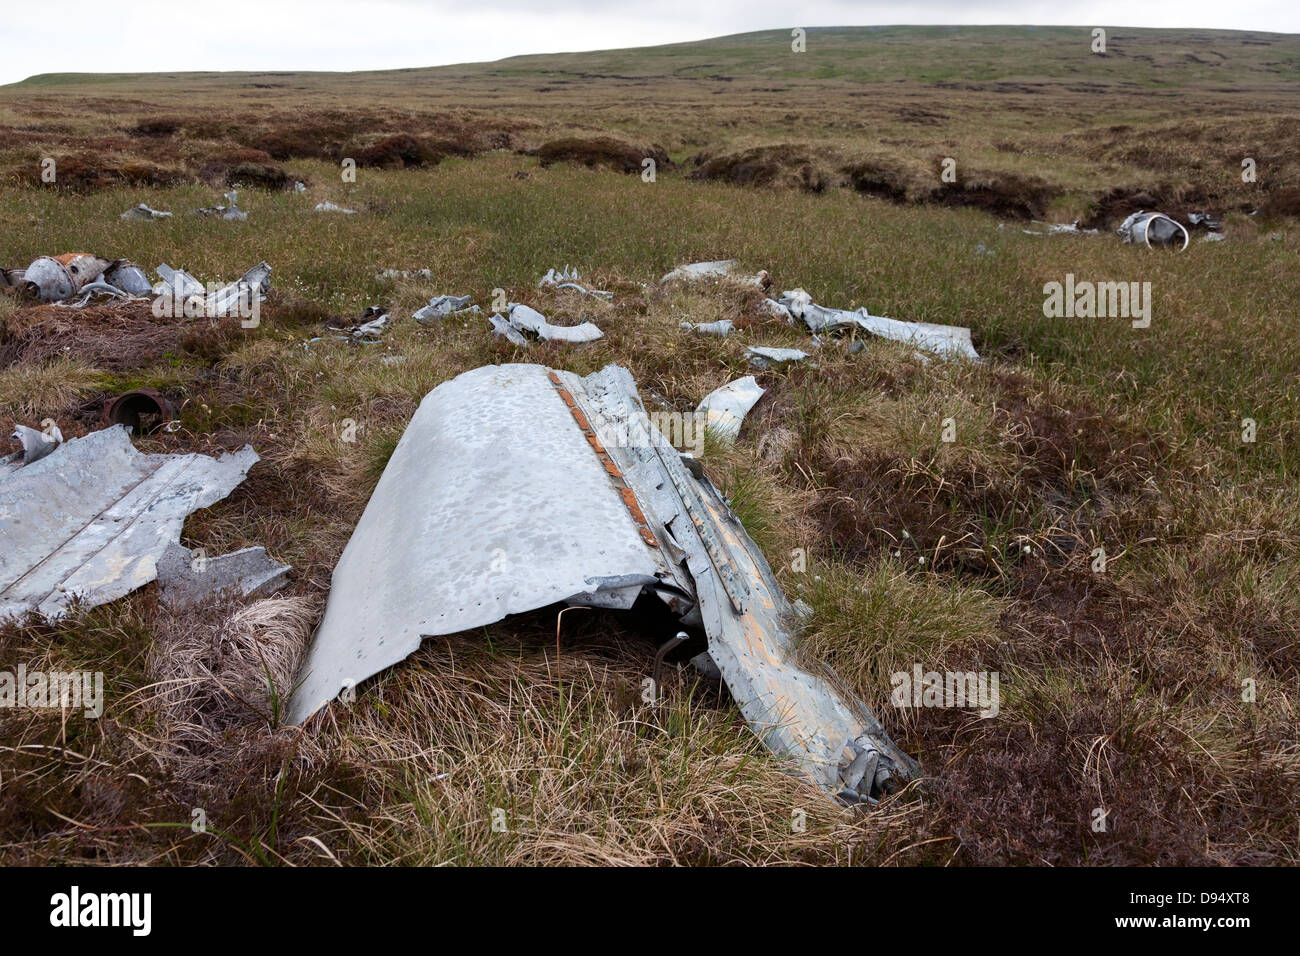 Aircraft Wreckage from a Gloster Meteor Jet which Crashed on Knock Fell in the North Pennines on 24th March 1954 Stock Photo